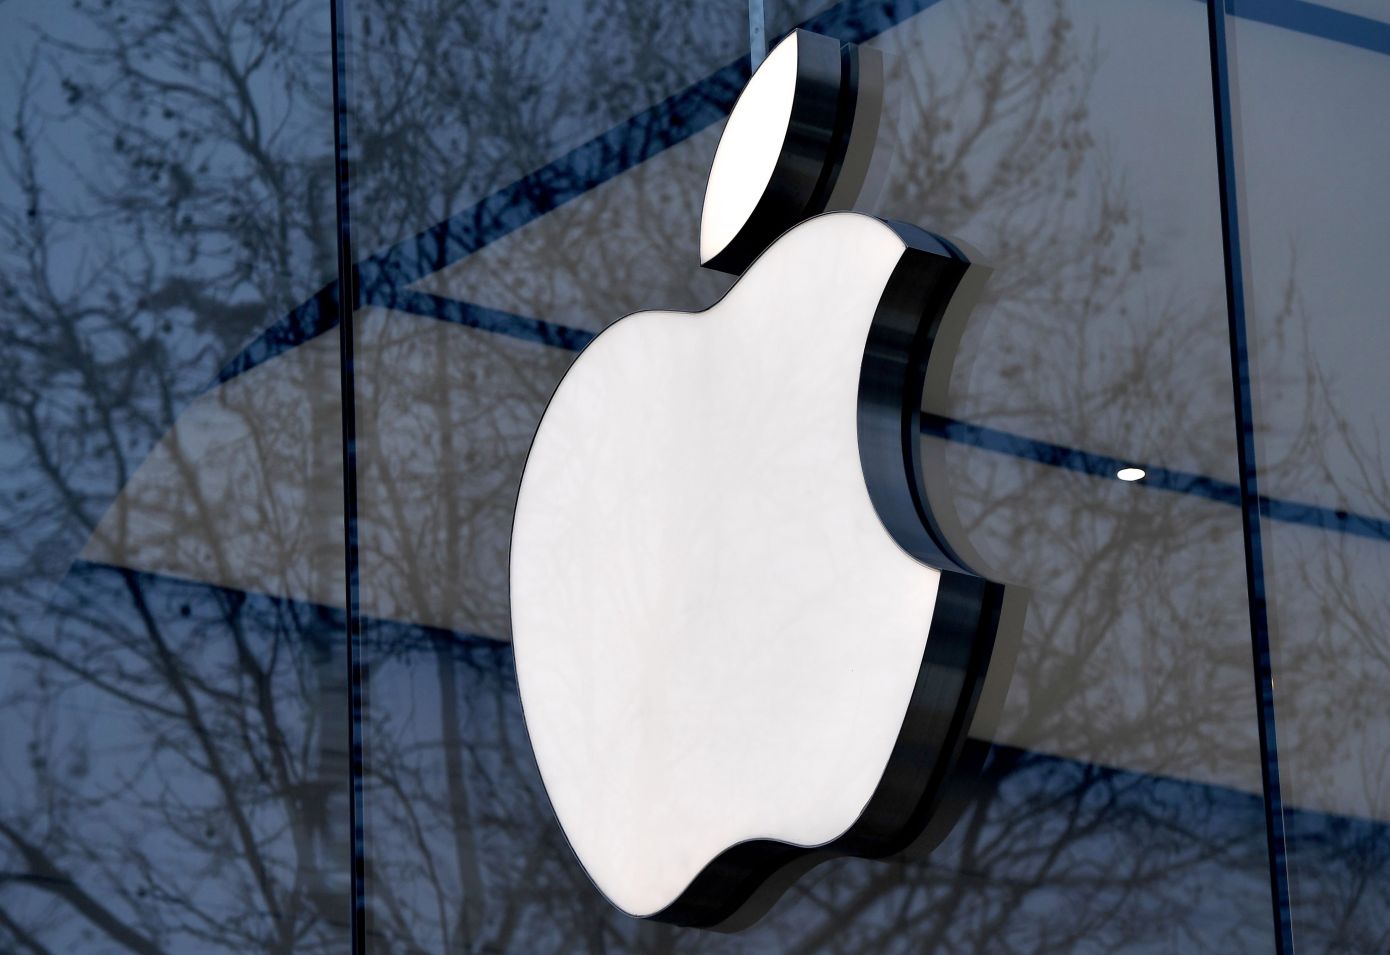 The logo of the US multinational technology company Apple is on display on the facade of an Apple store in Brussels, on February 8, 2018. / AFP PHOTO / Emmanuel DUNAND (Photo credit should read EMMANUEL DUNAND/AFP/Getty Images)